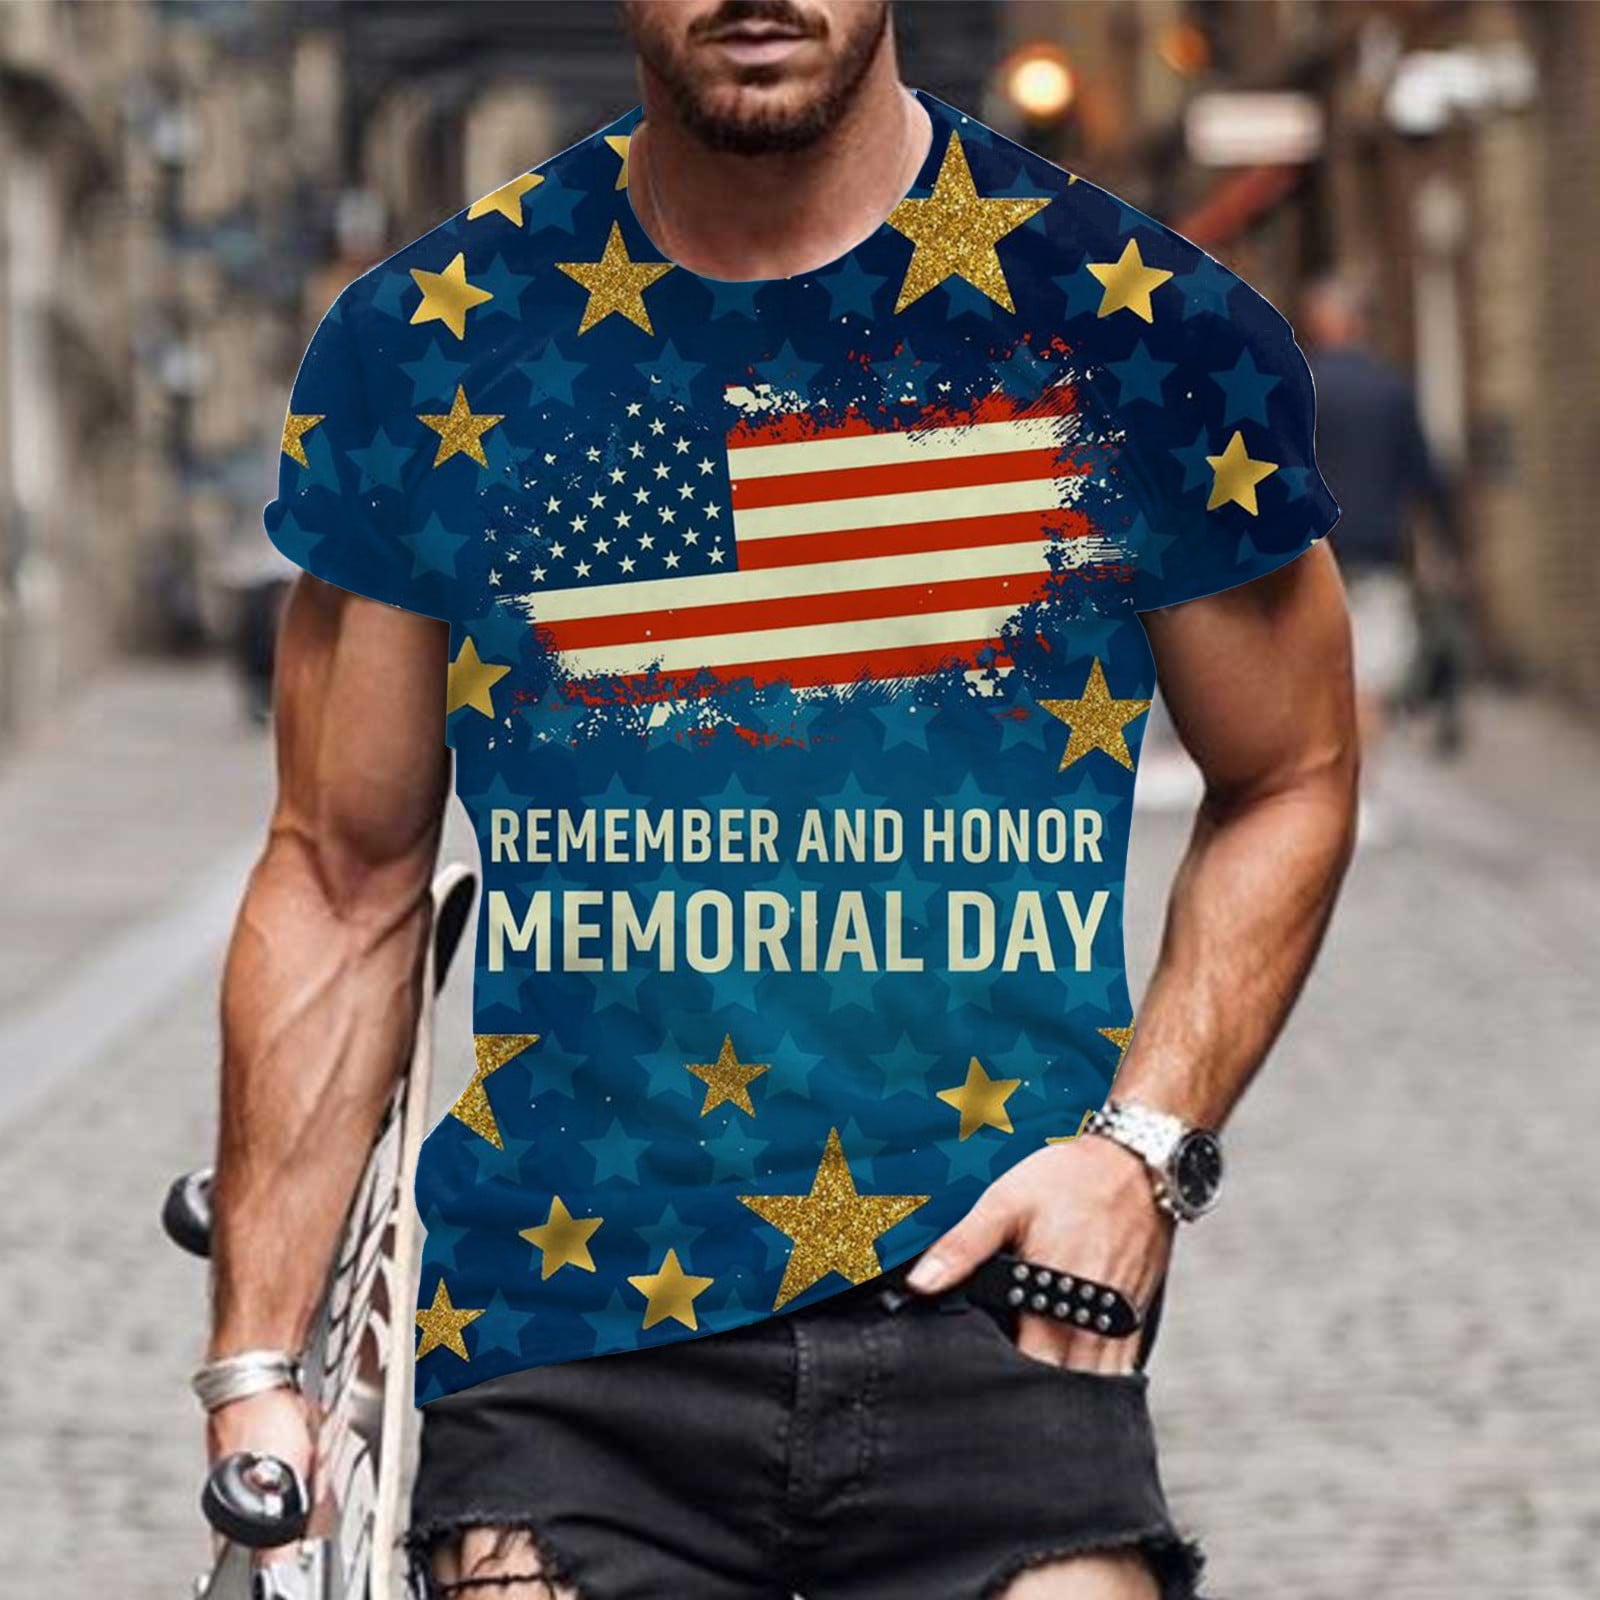 Cllios Men's American USA Flag T-Shirt Summer Casual Short Sleeve 3D Graphic Print Tops Muscle Workout Patriotic Blouse, Size: XL, Blue